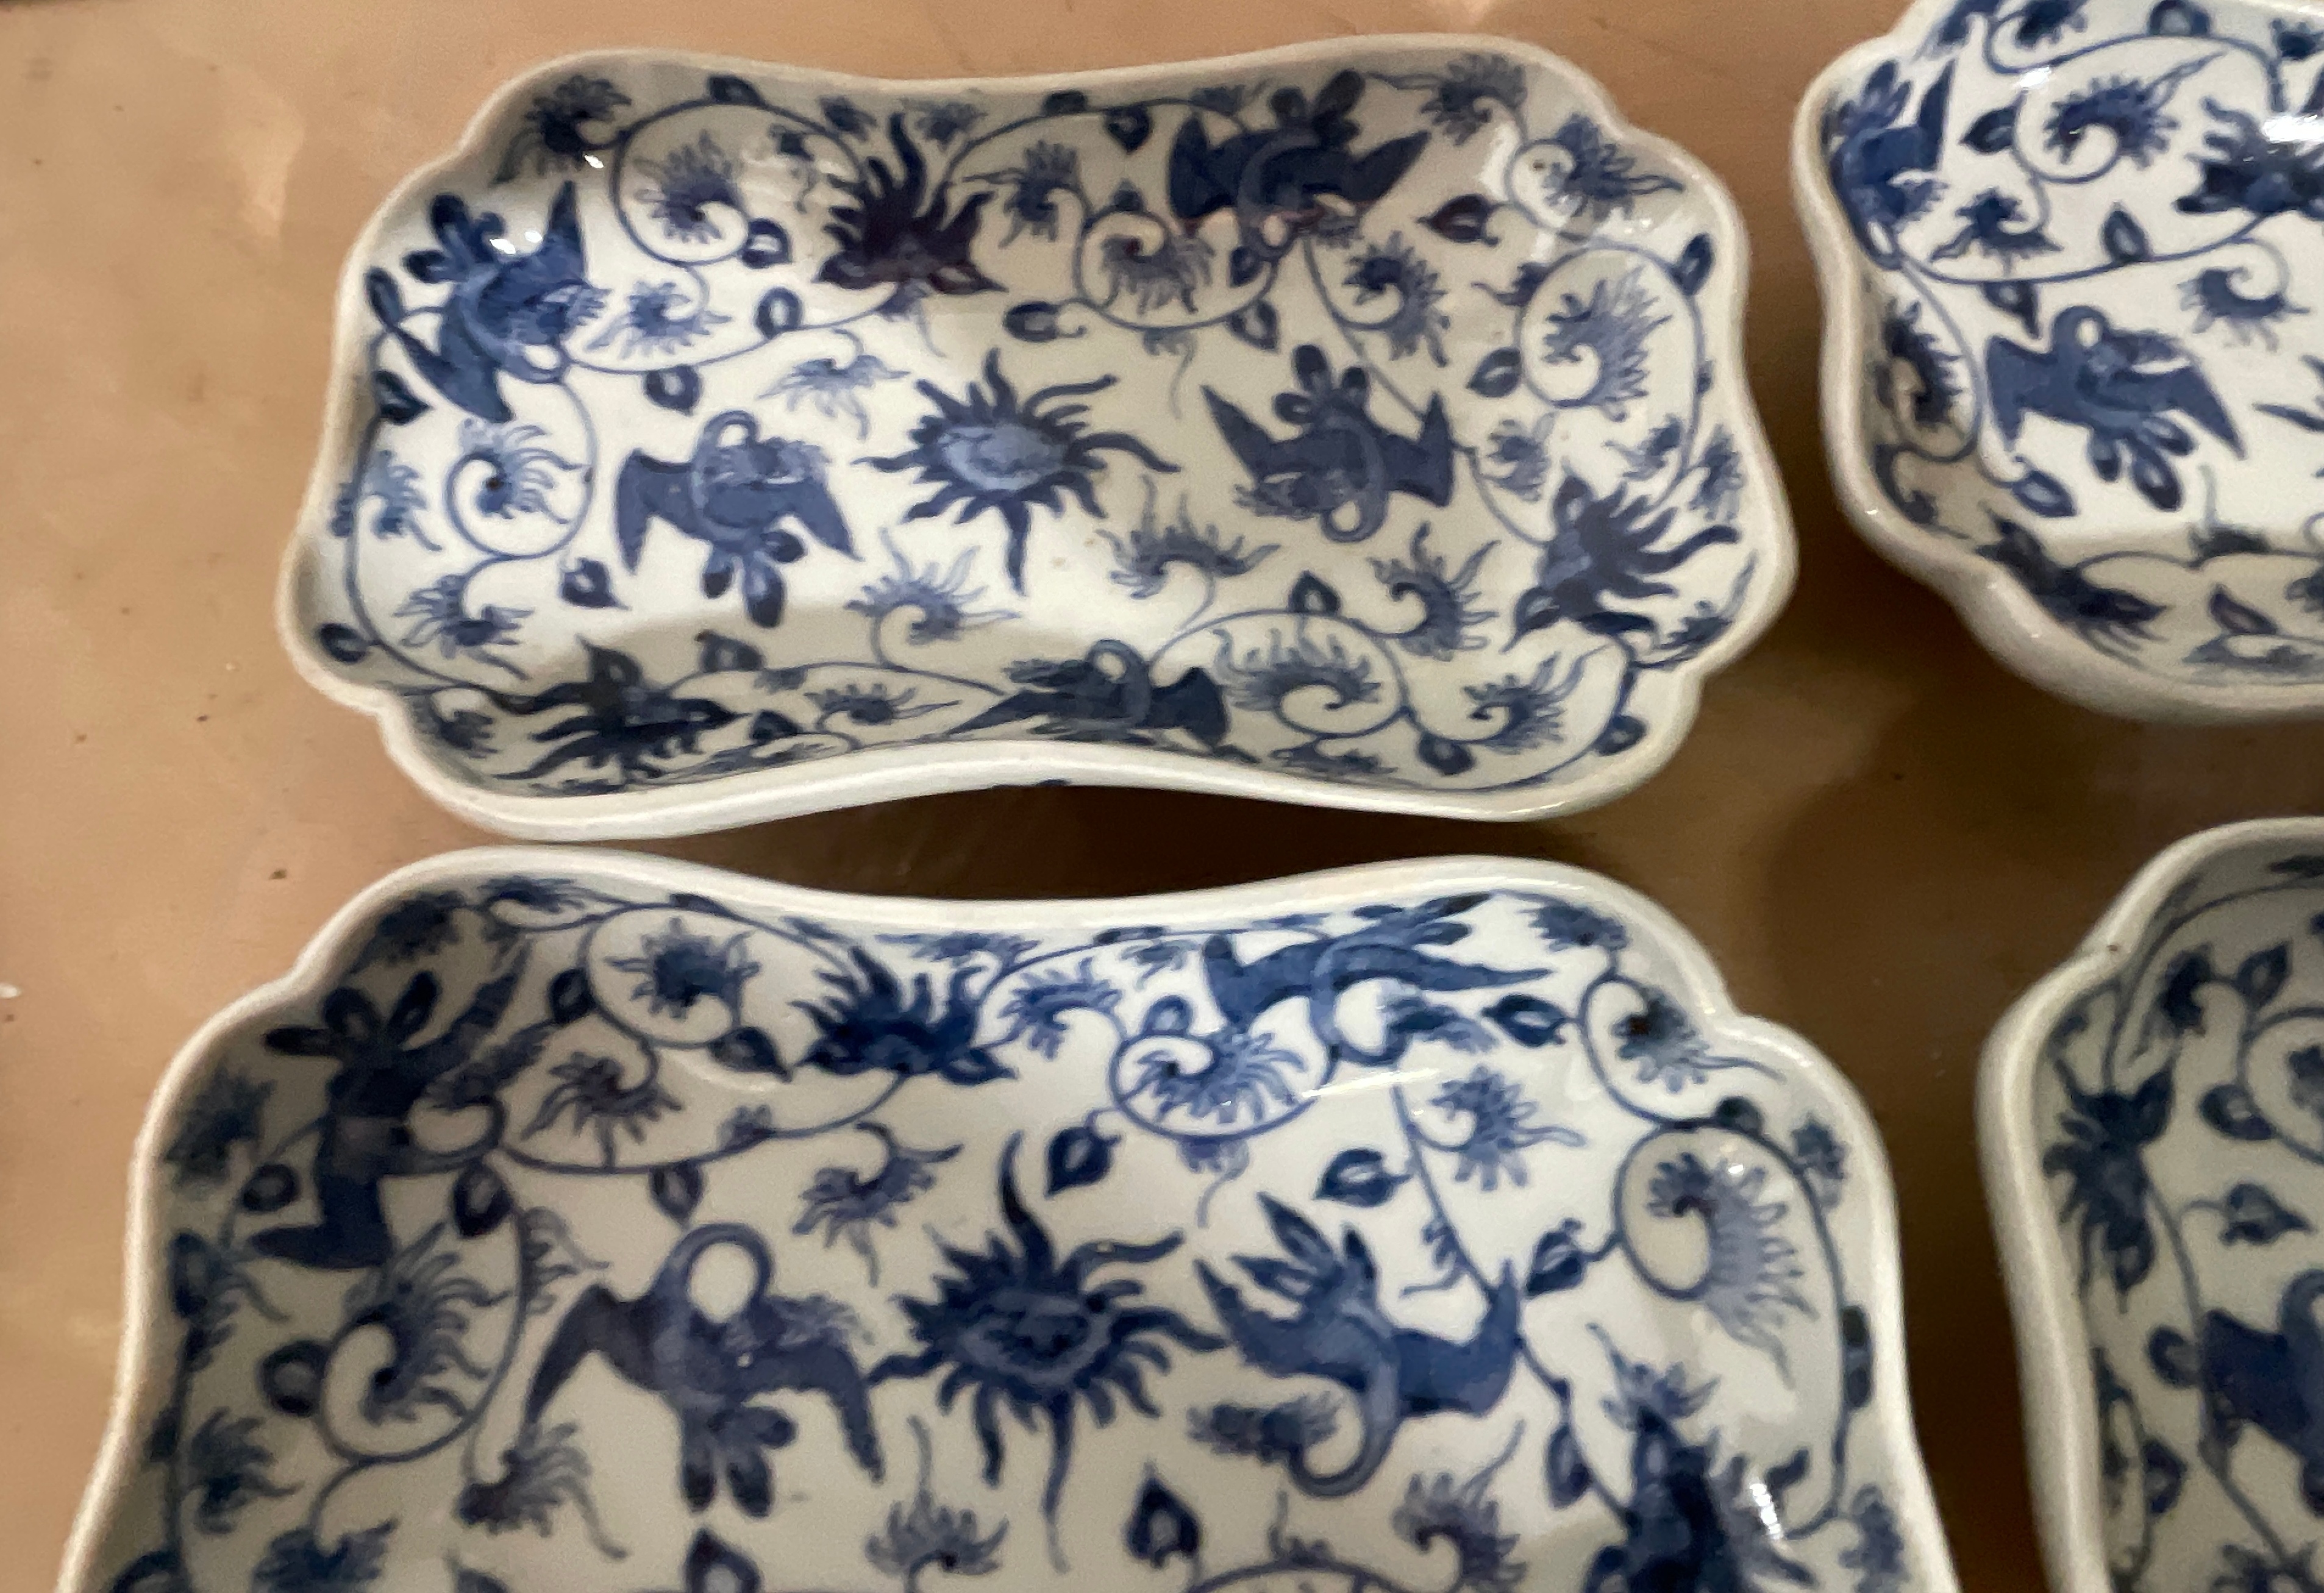 Lot of 4 Blue and White Chinese Oblong Dishes - 120mm x 98mm. - Image 2 of 6